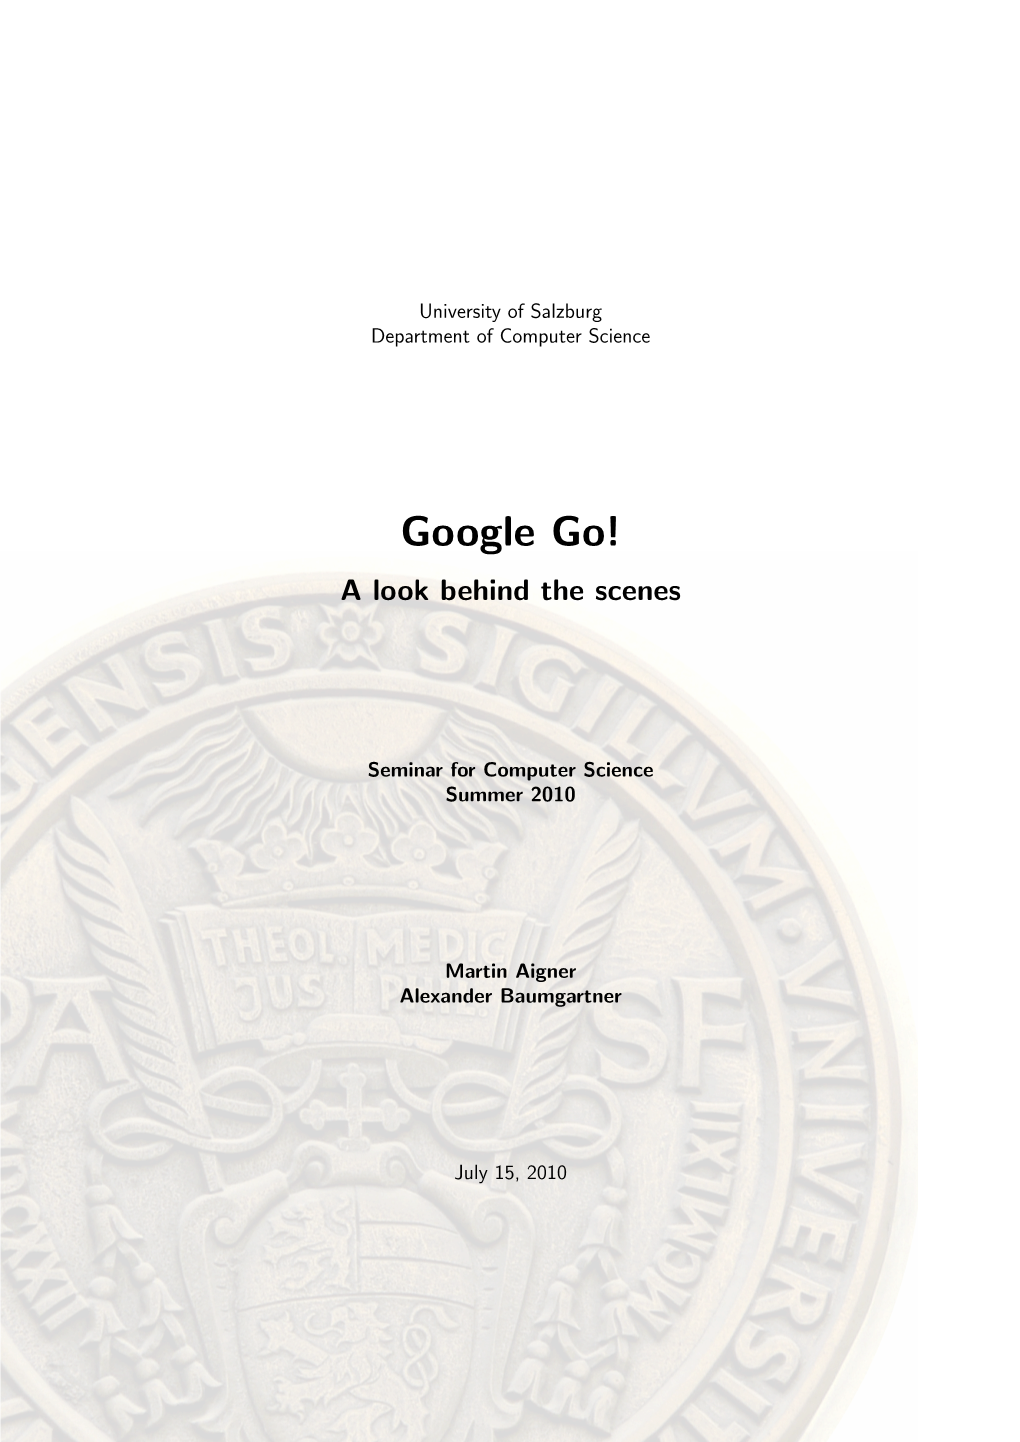 Google Go! a Look Behind the Scenes